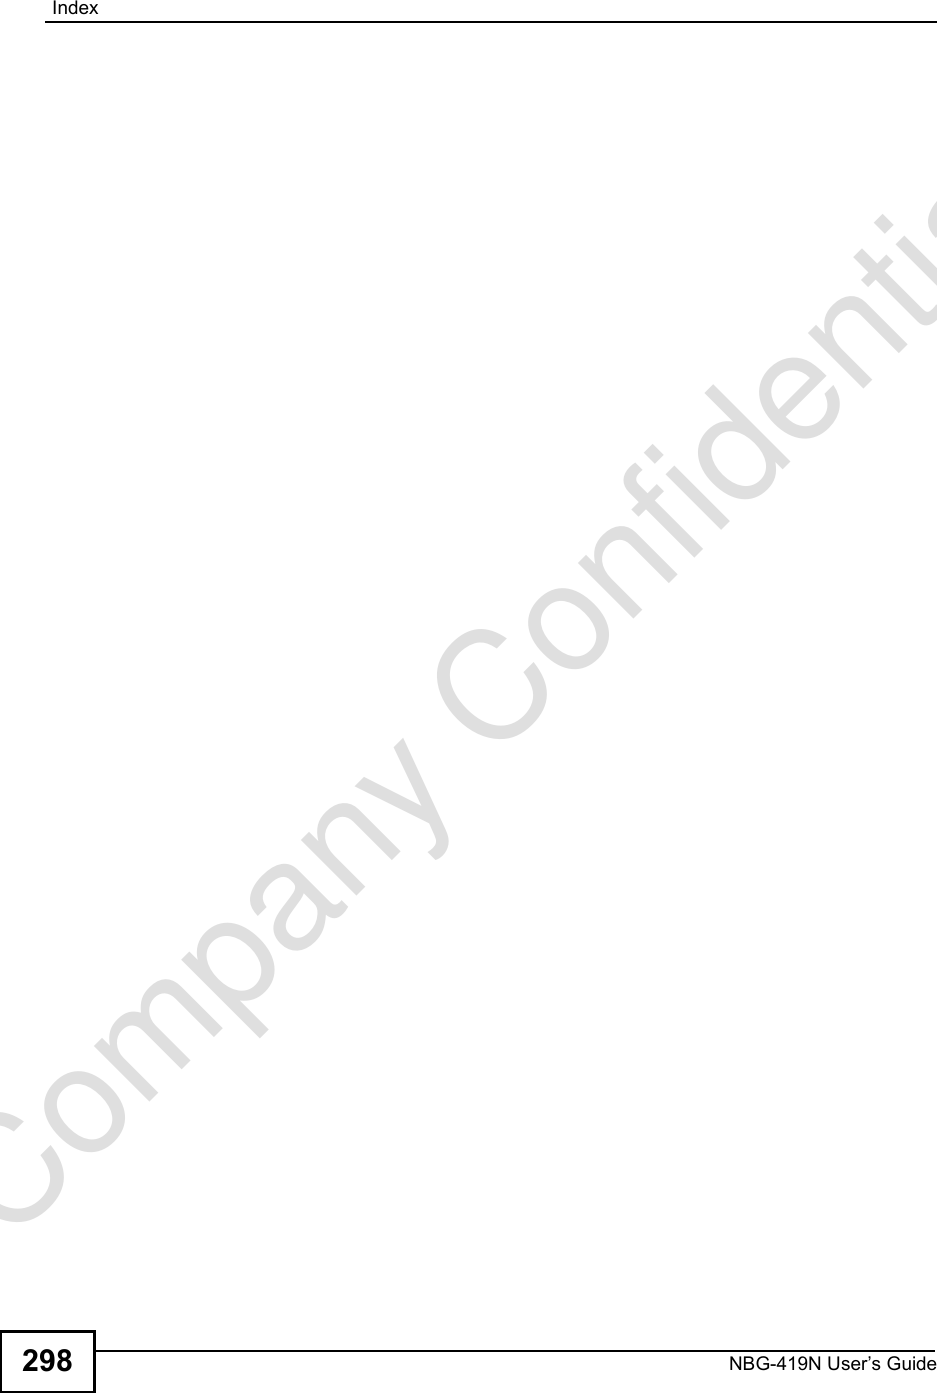 IndexNBG-419N User s Guide298Company Confidential